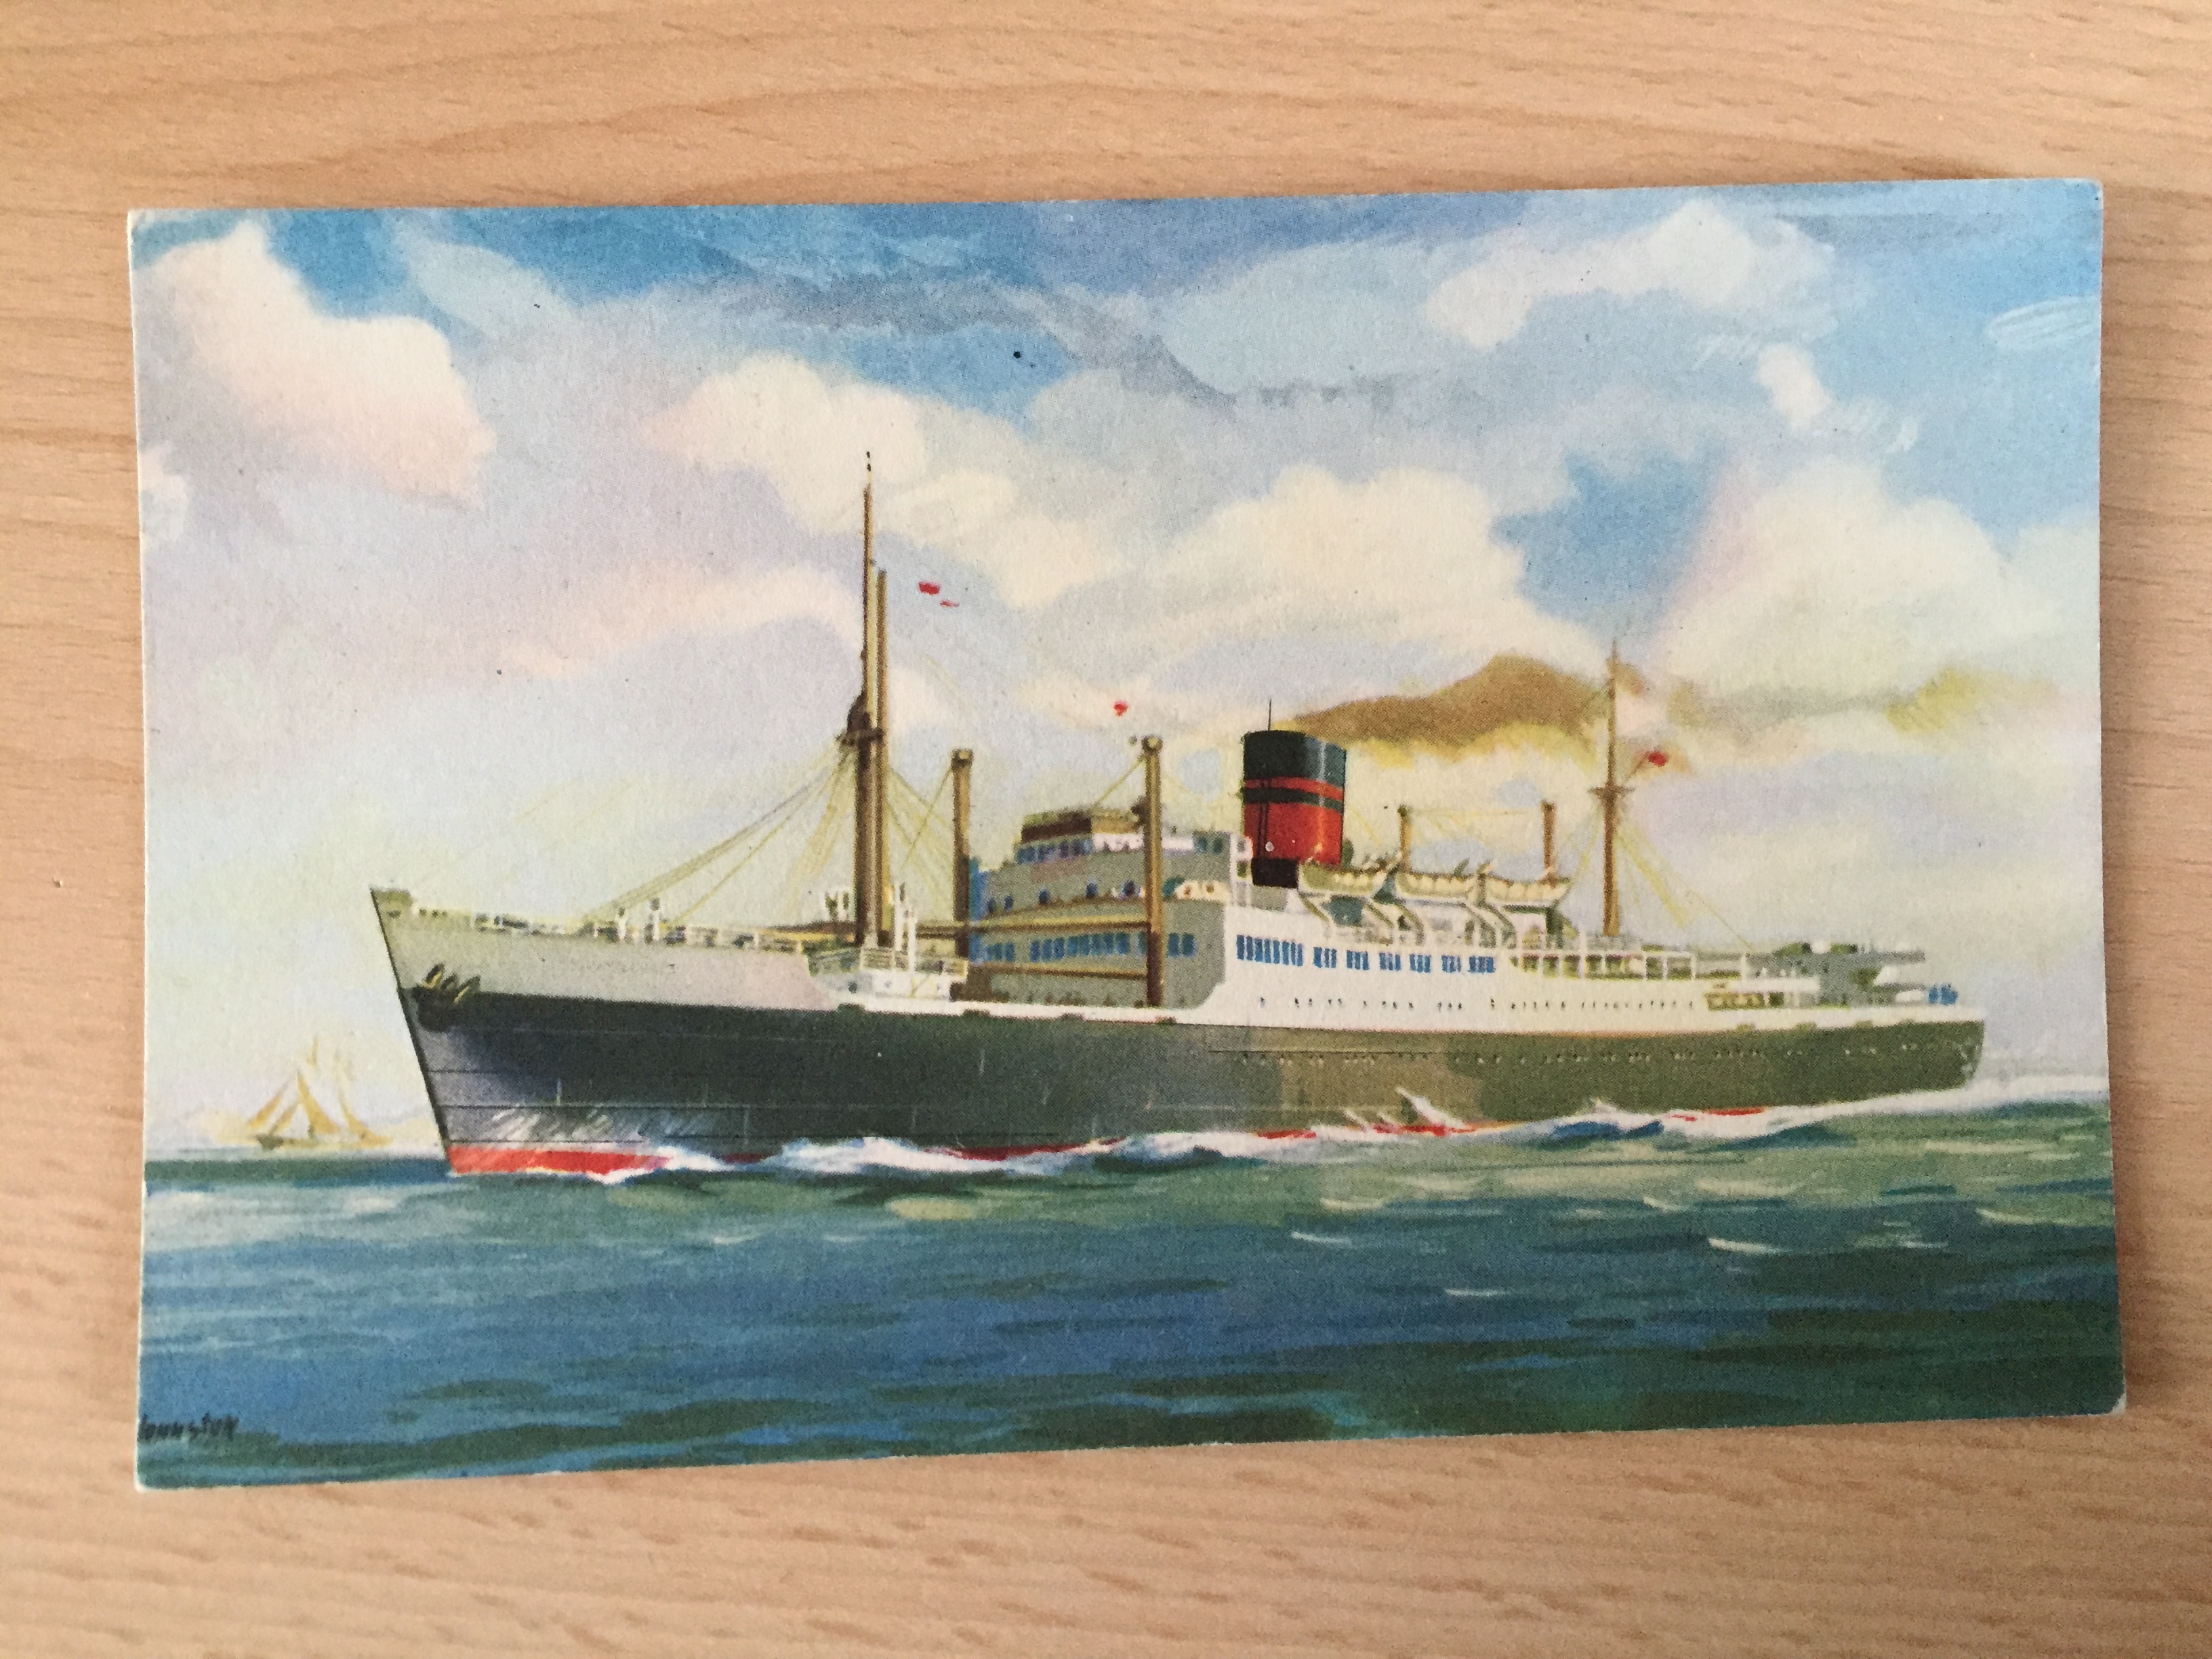 COLOUR POSTCARD OF THE NEW ZEALAND SHIPPING COMPANY VESSEL THE TONGARIRO